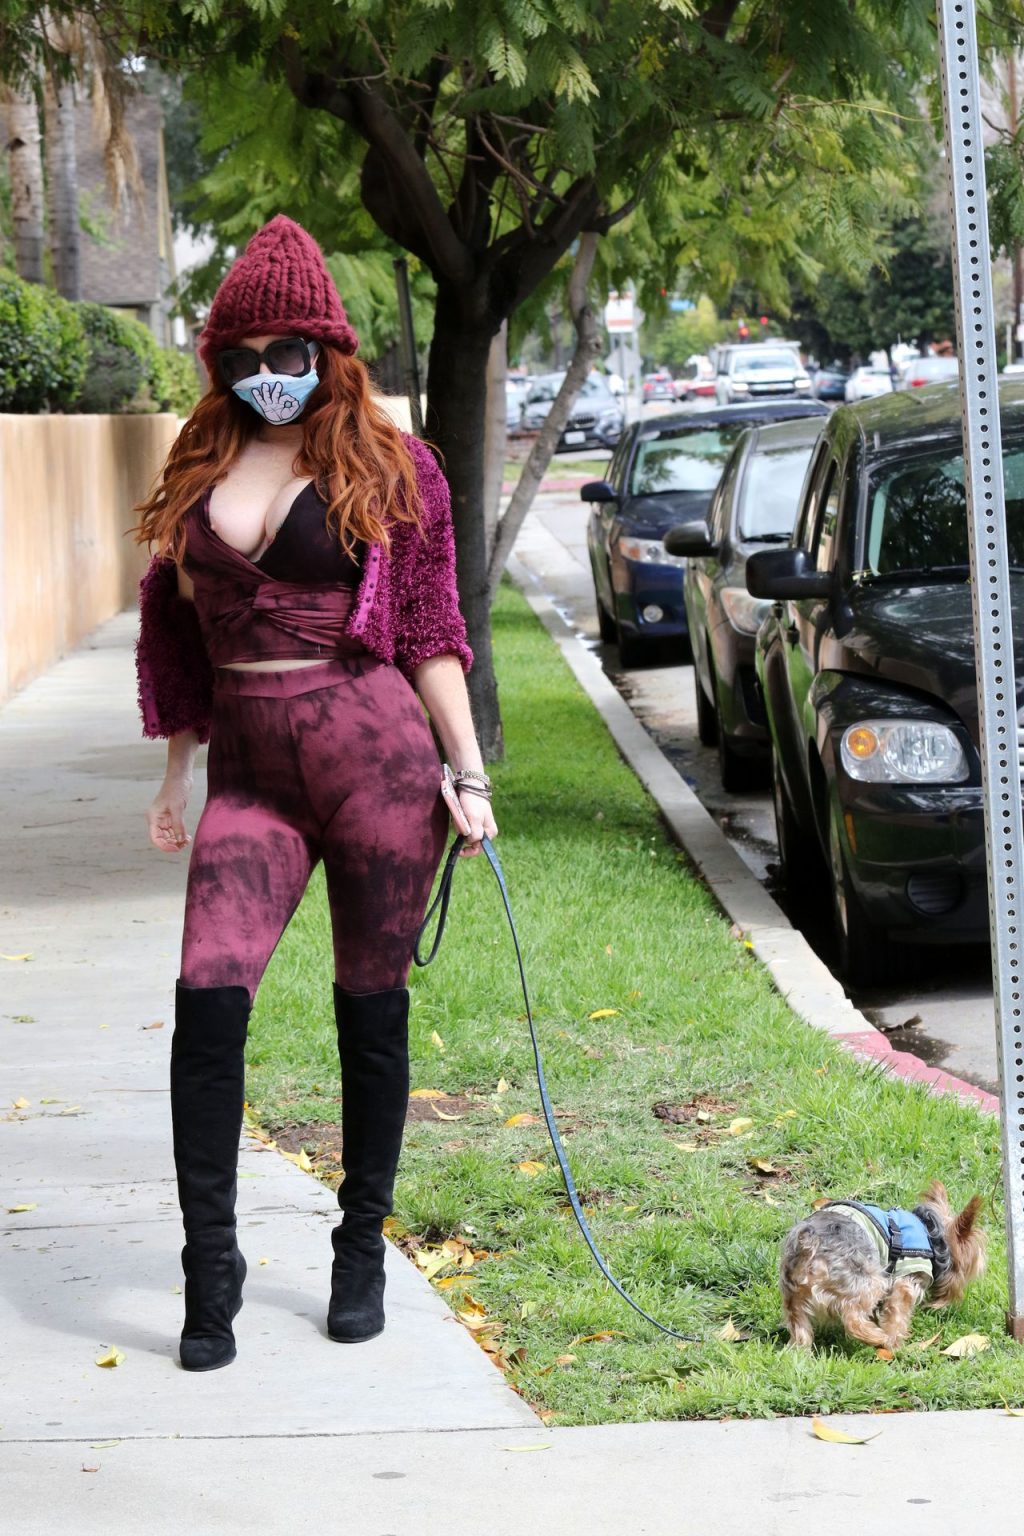 Phoebe Price Walks Her Dog While Nipple Out (19 Photos)